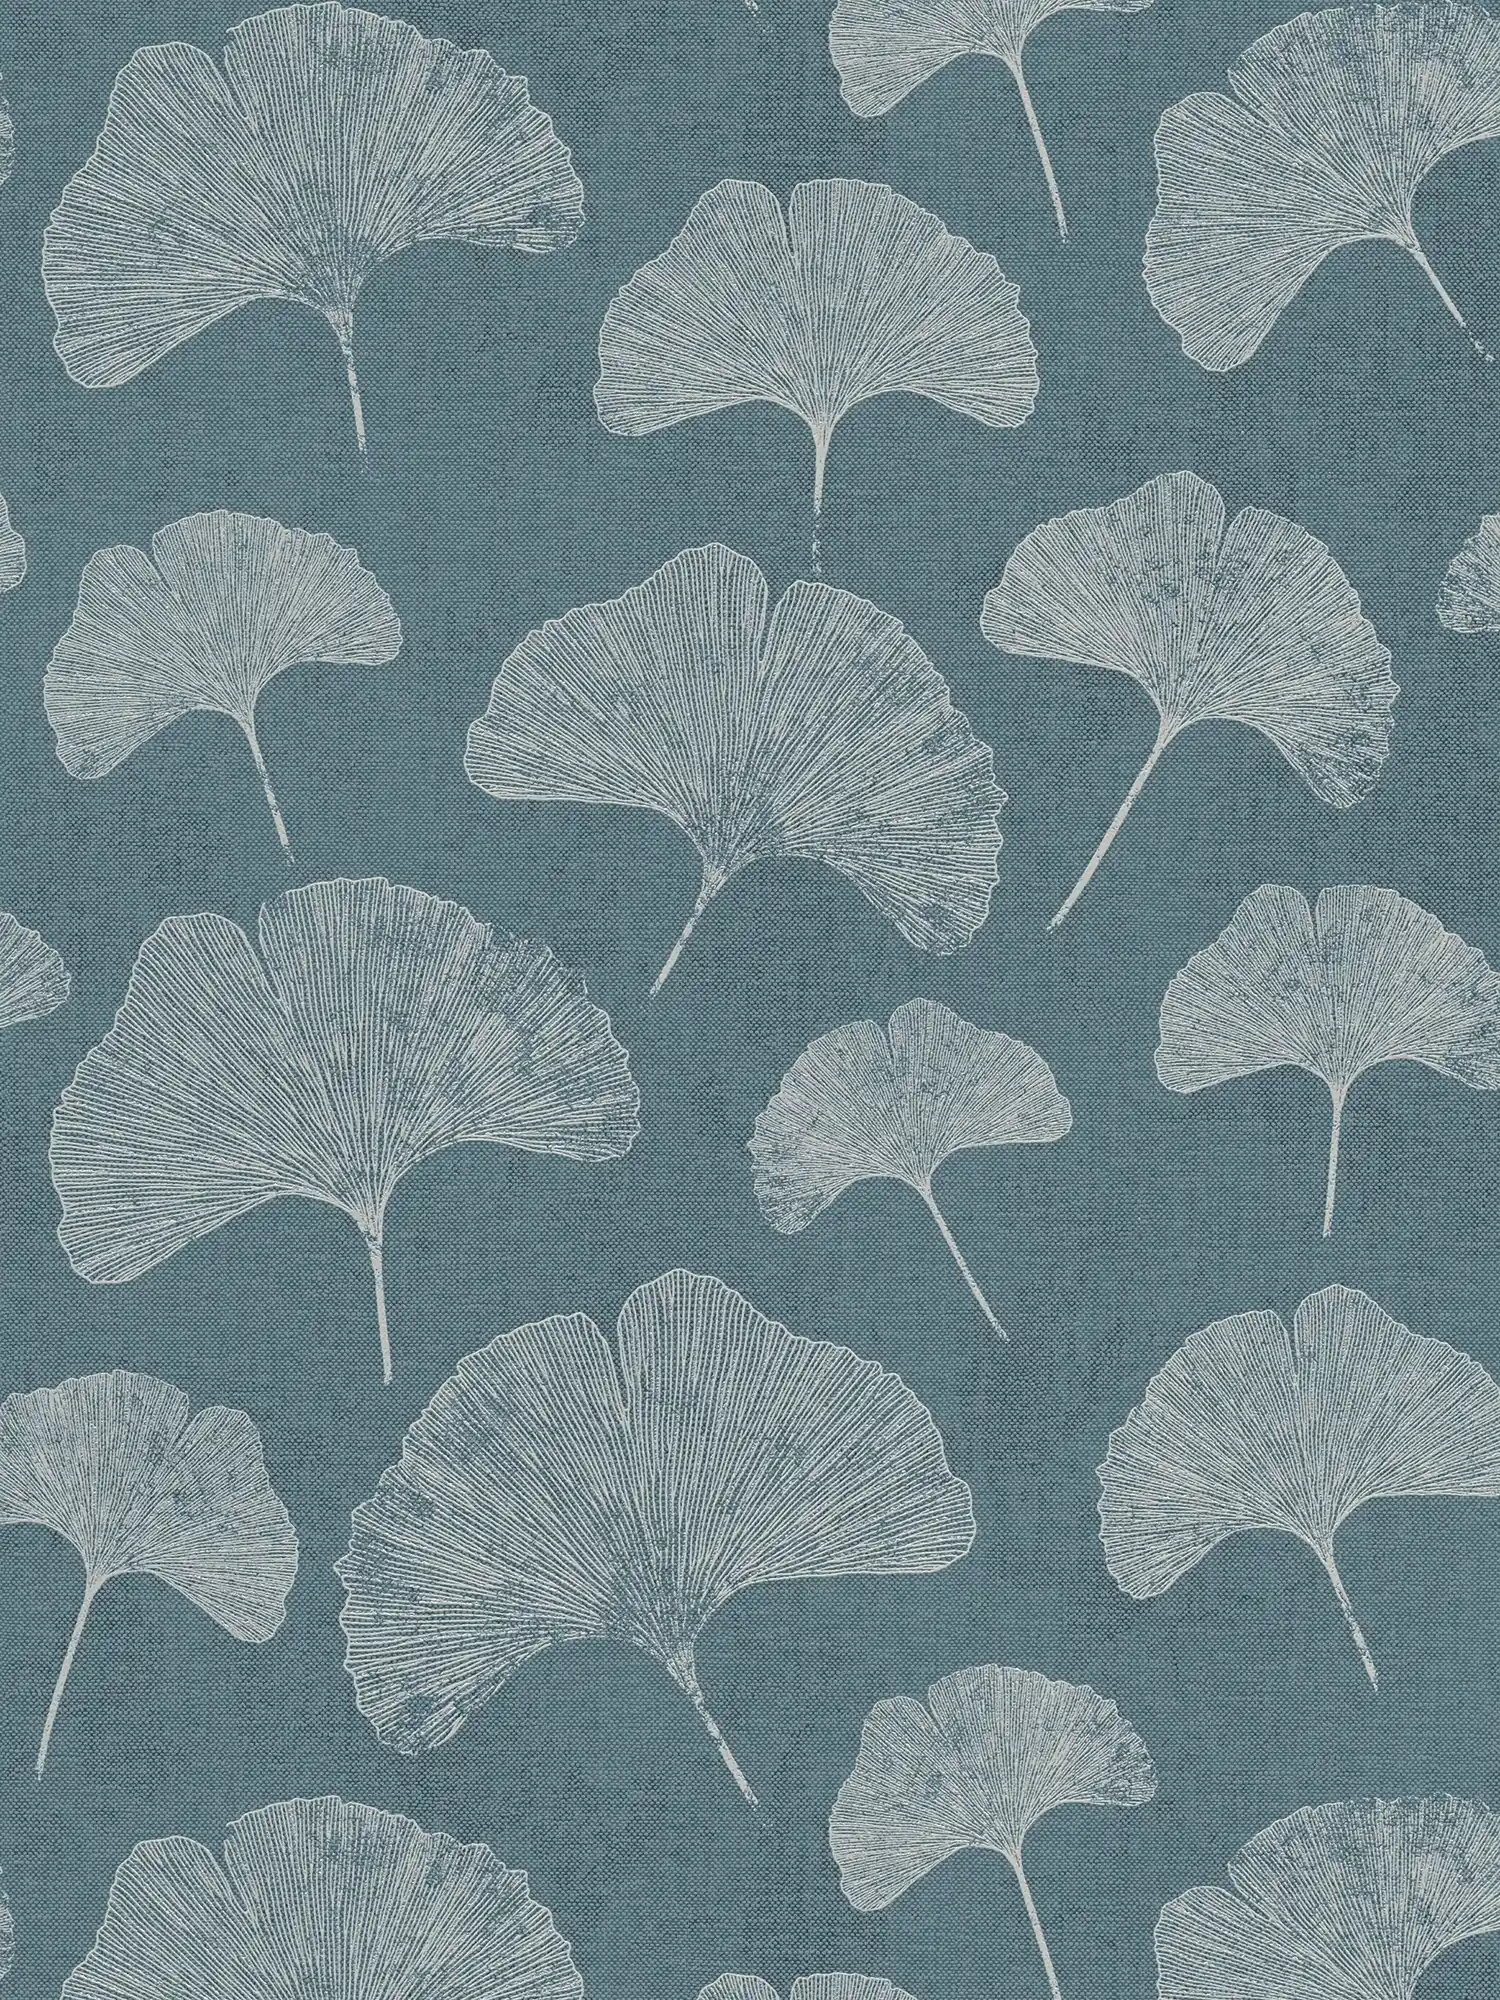 Floral wallpaper with leaves matt textured - blue, white, silver
